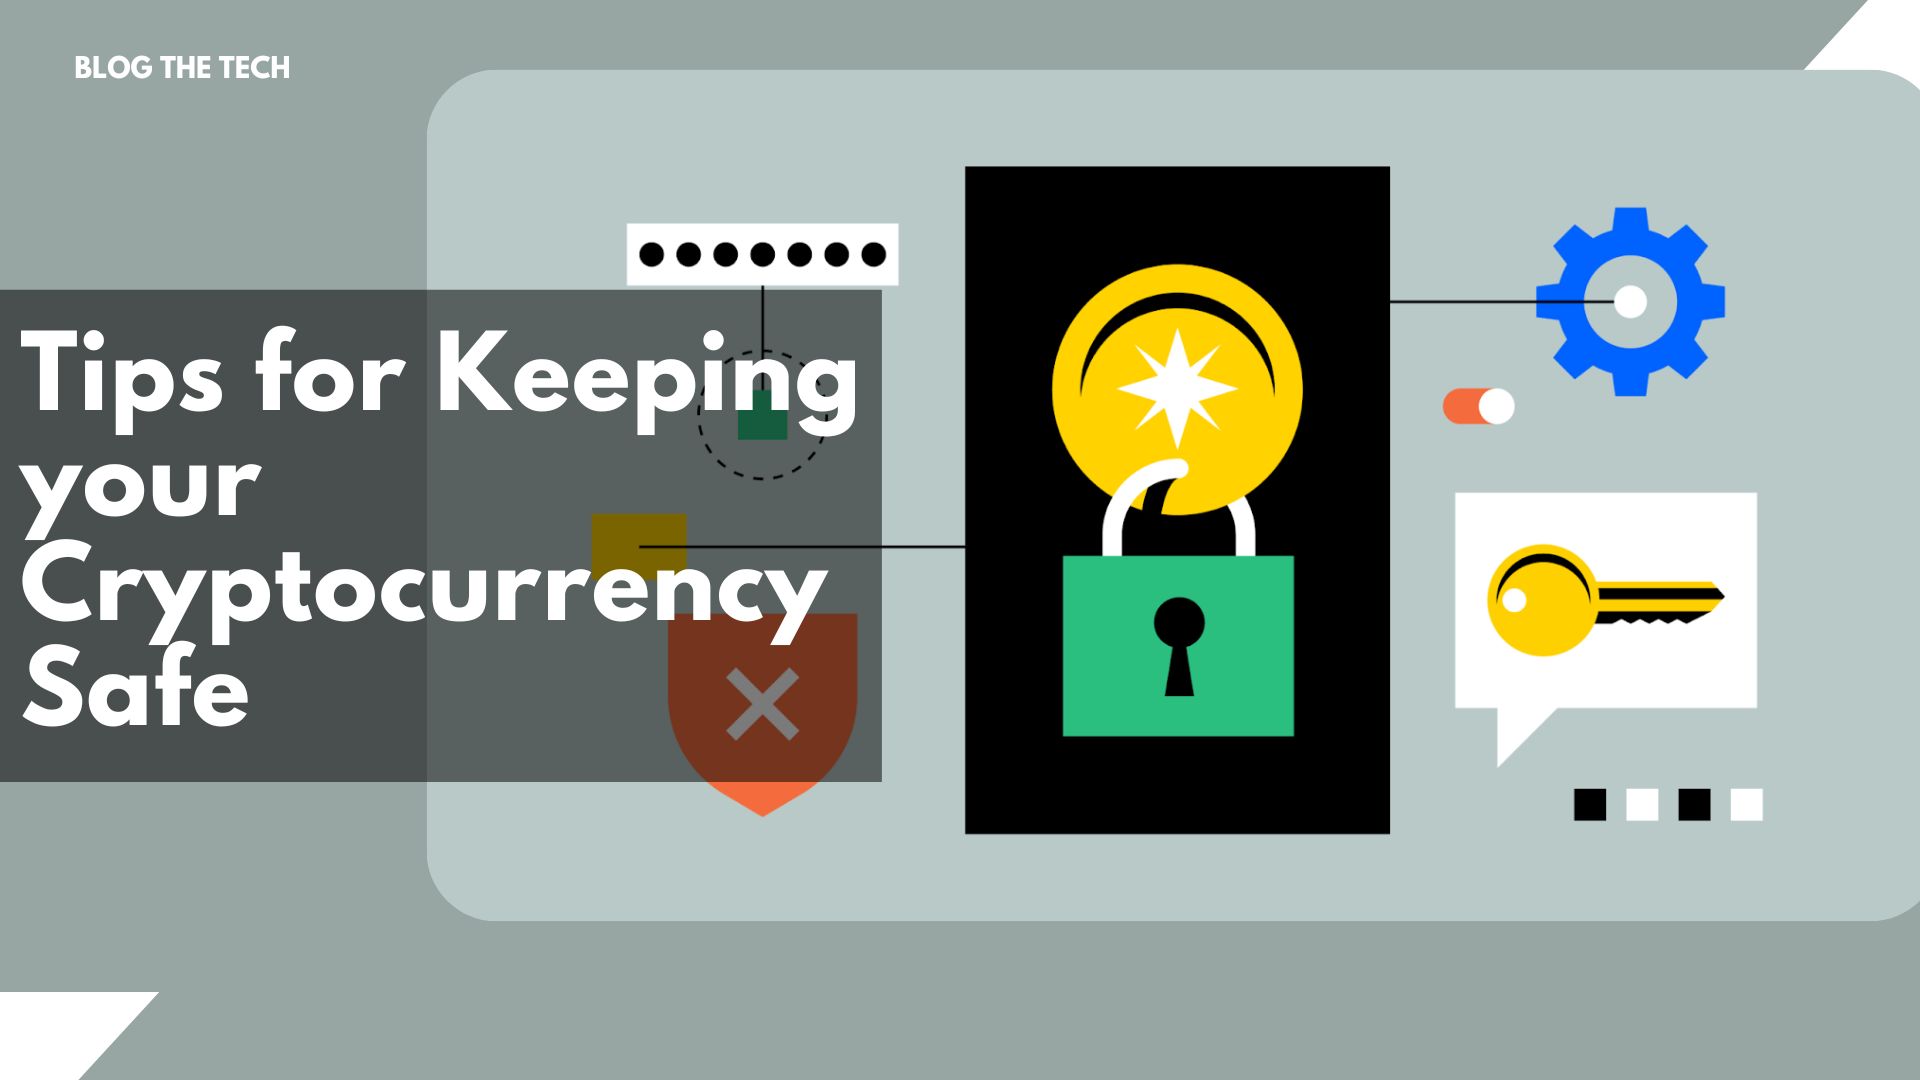 Tips for Keeping your Cryptocurrency Safe